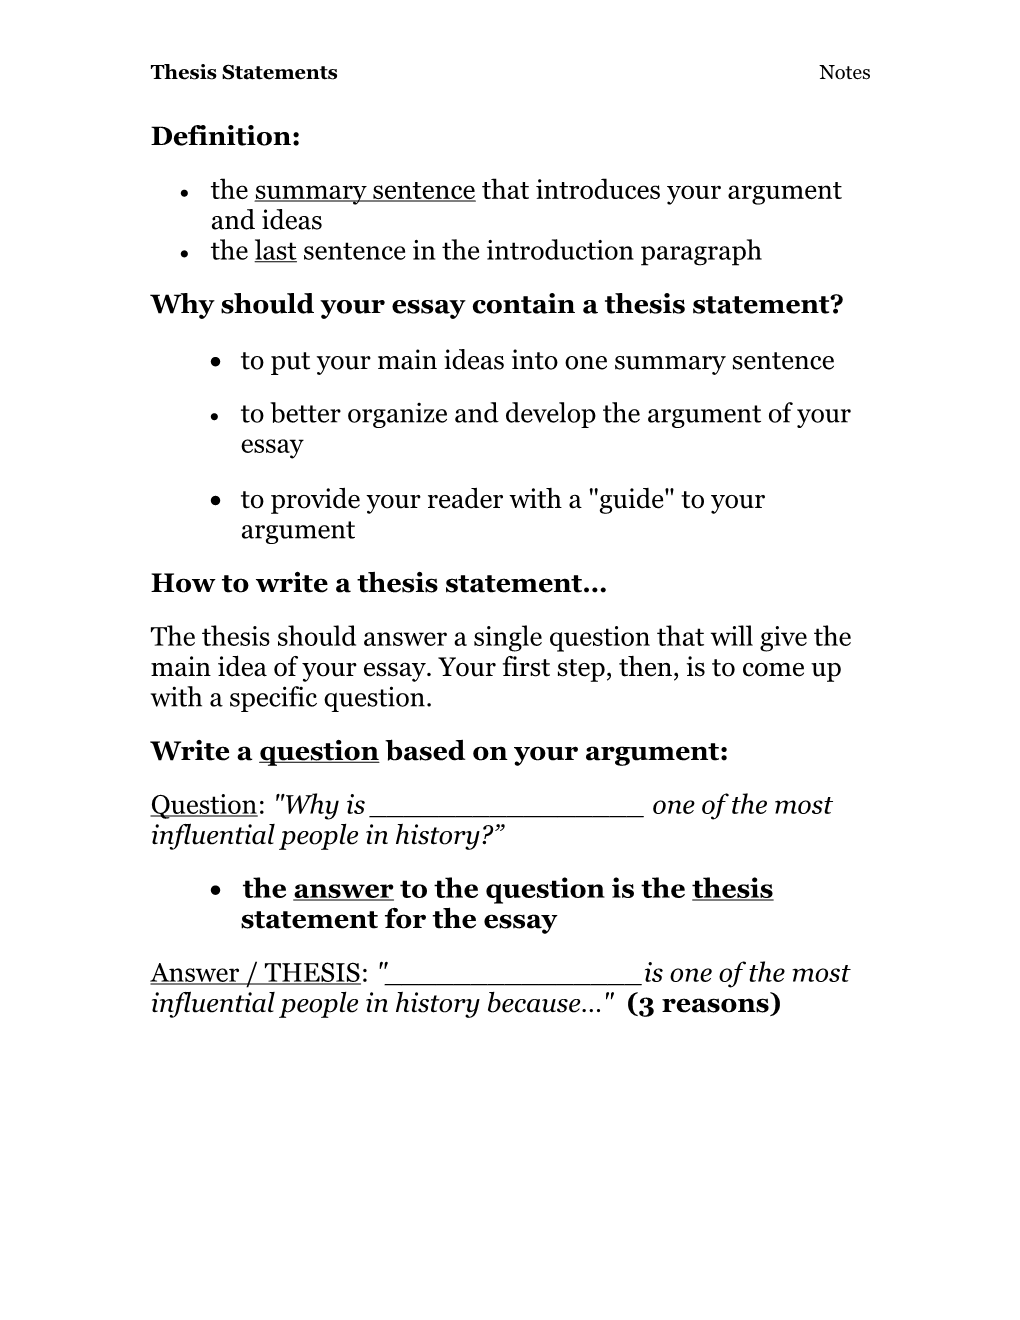 Why Should Your Essay Contain a Thesis Statement?